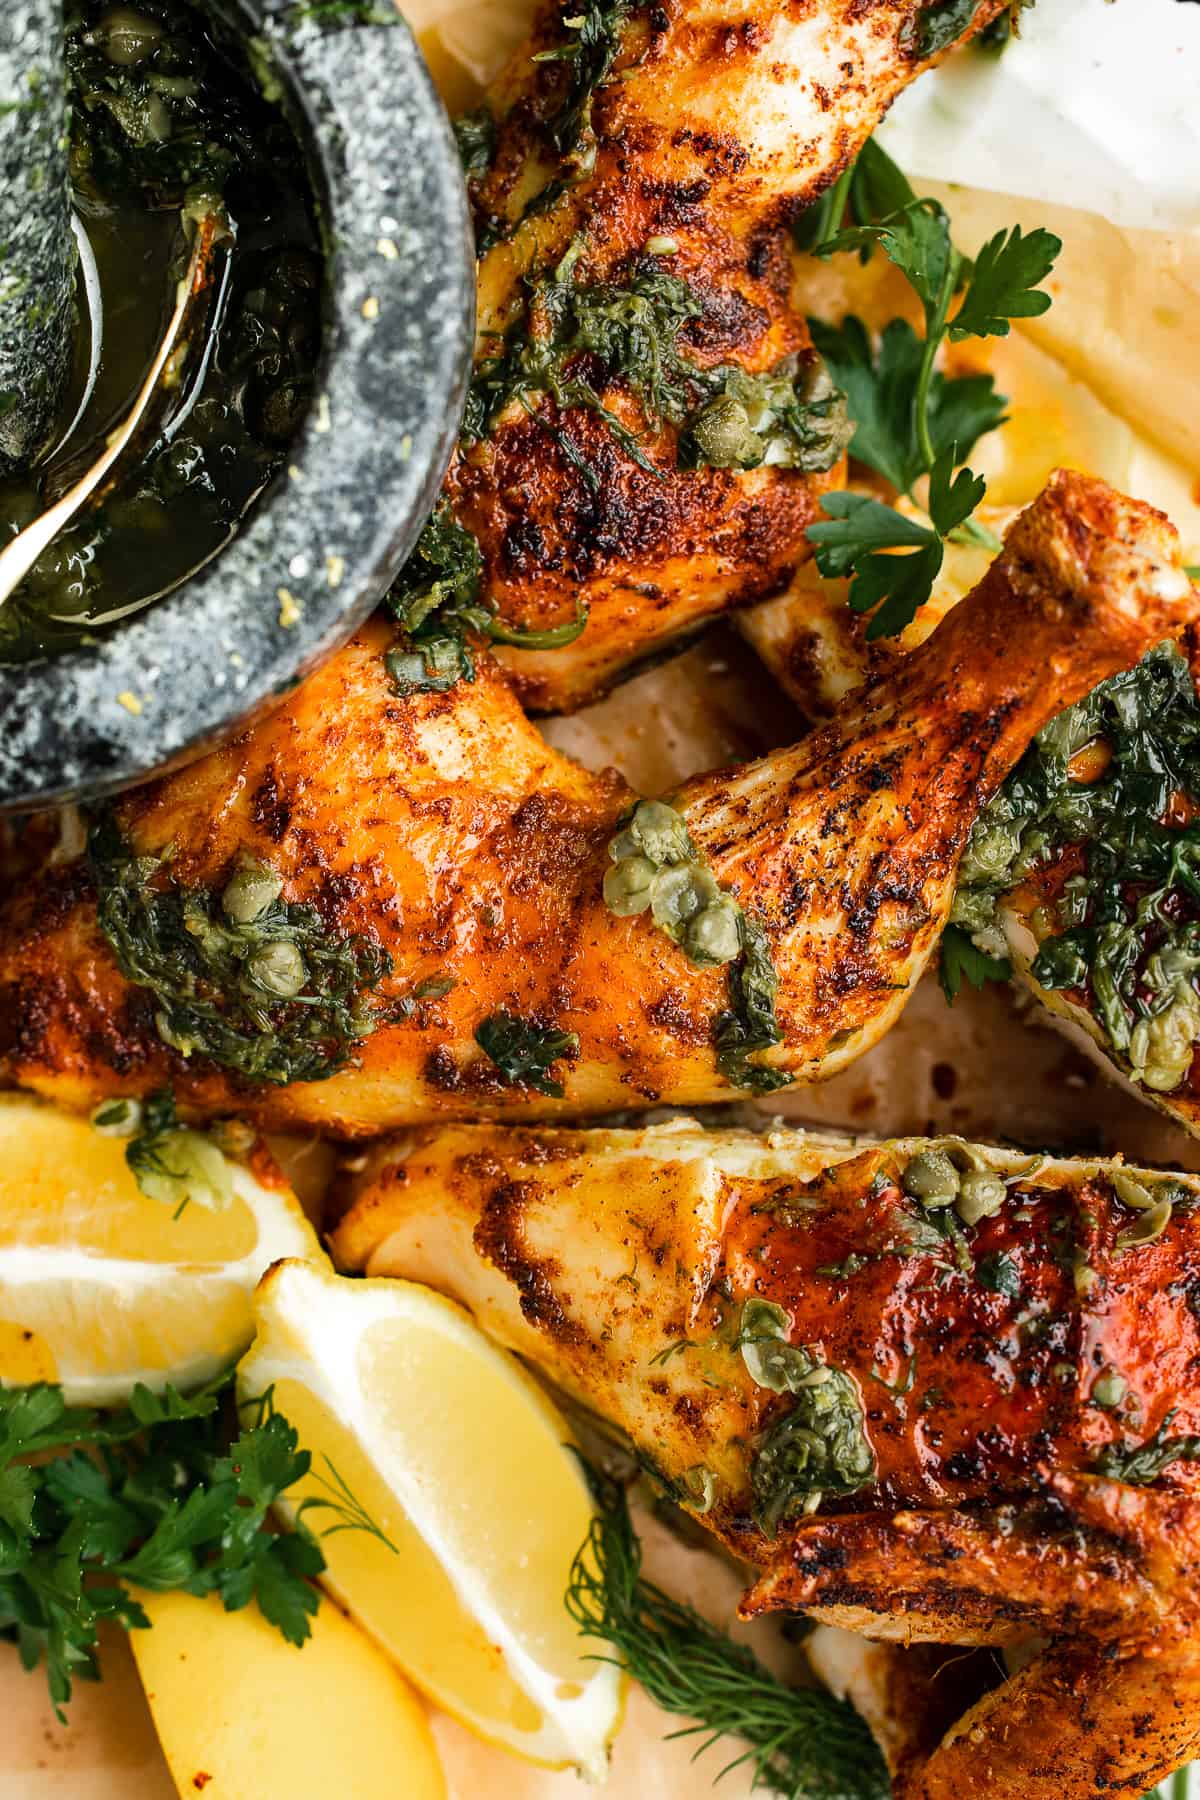 Cooked chicken arranged on a platter, dressed with herb sauce and lemons.